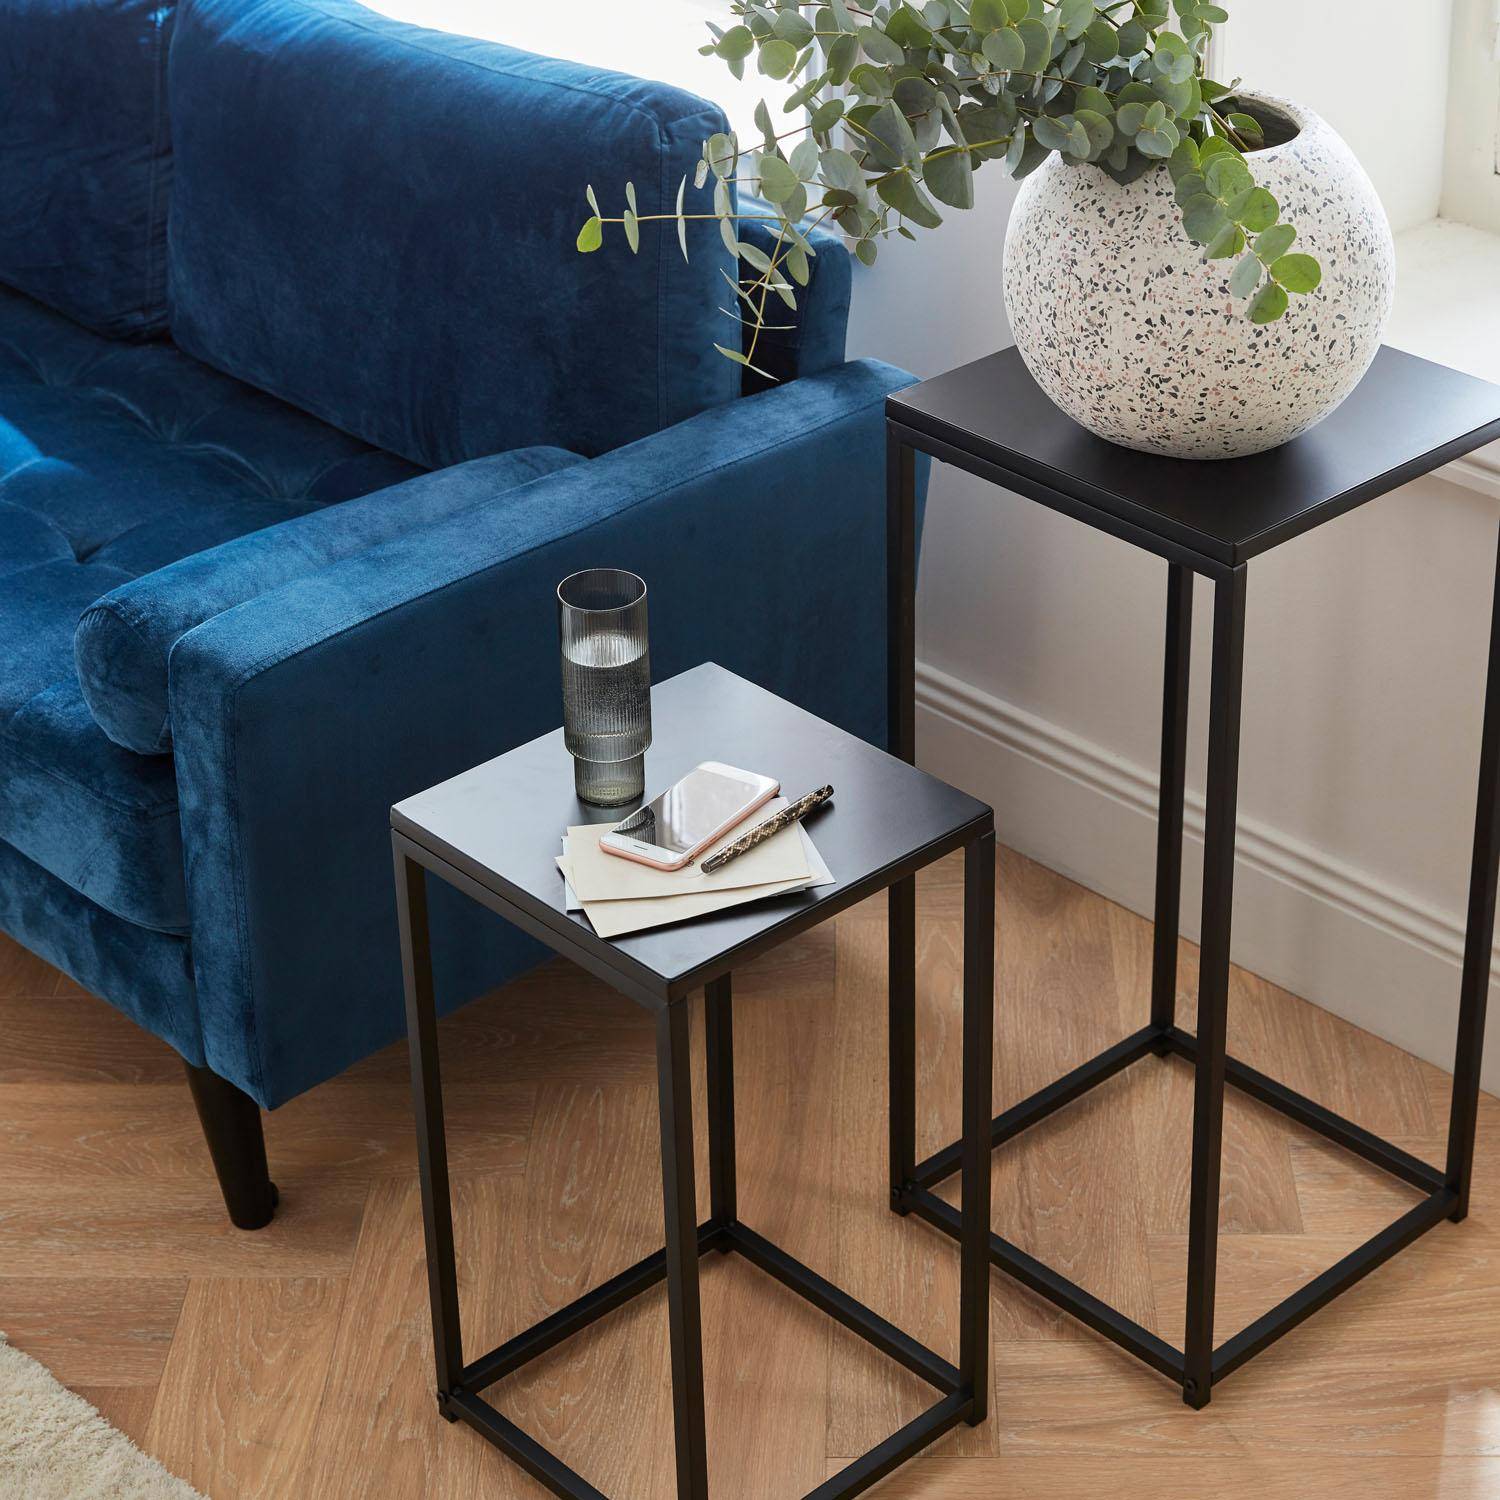 Set of 2 side tables/ end of sofa , Industrielle, Black,sweeek,Photo2